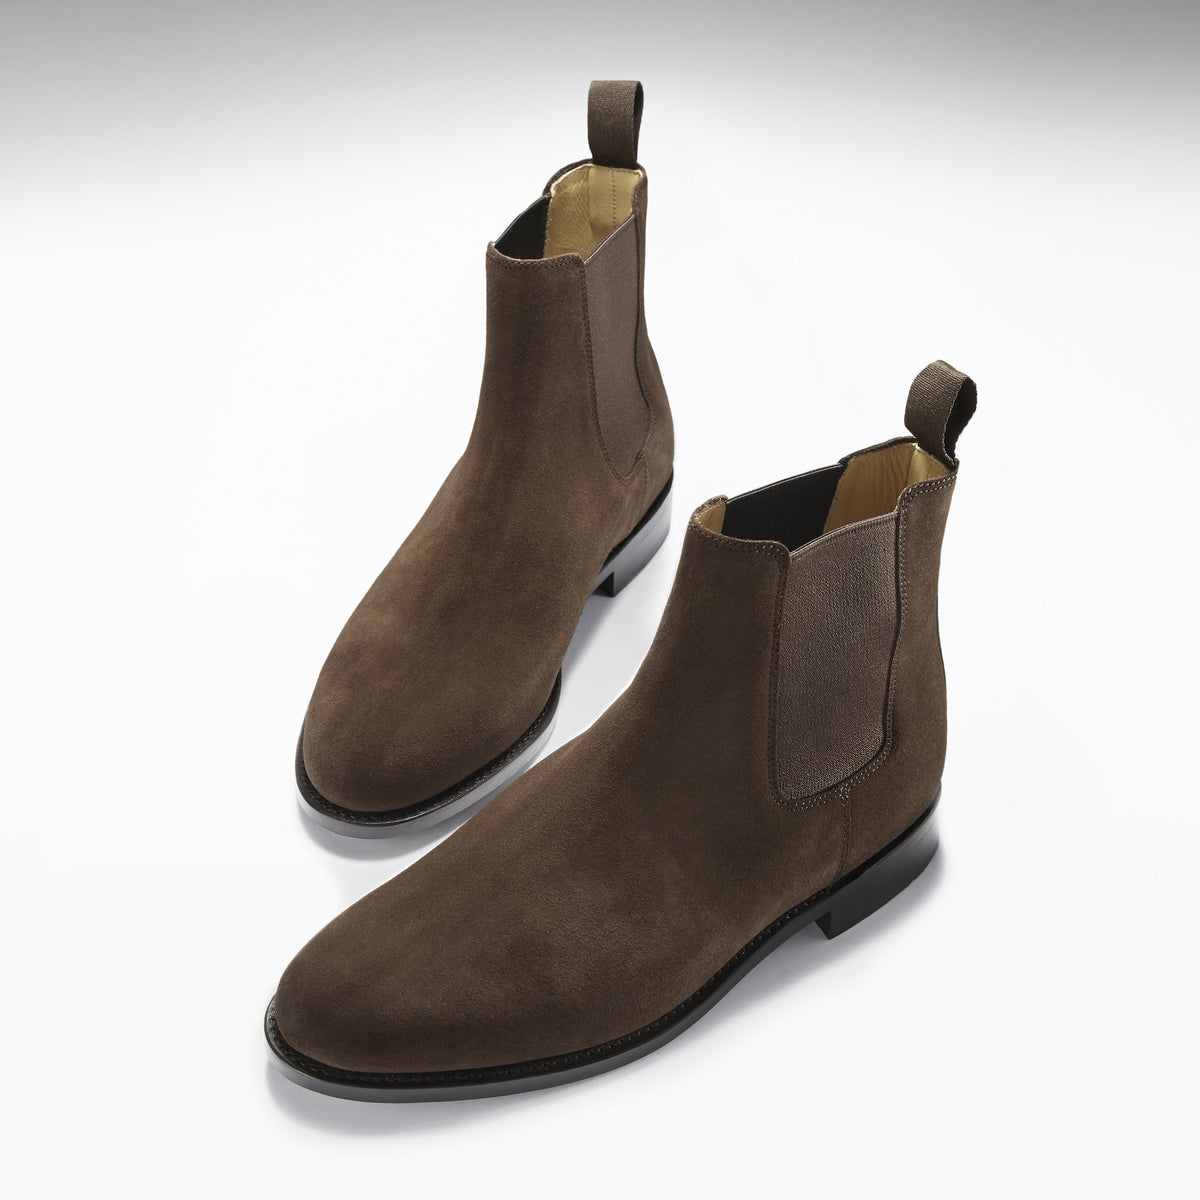 Brown Suede Chelsea Boots, Welted Leather Sole - Hugs & Co.